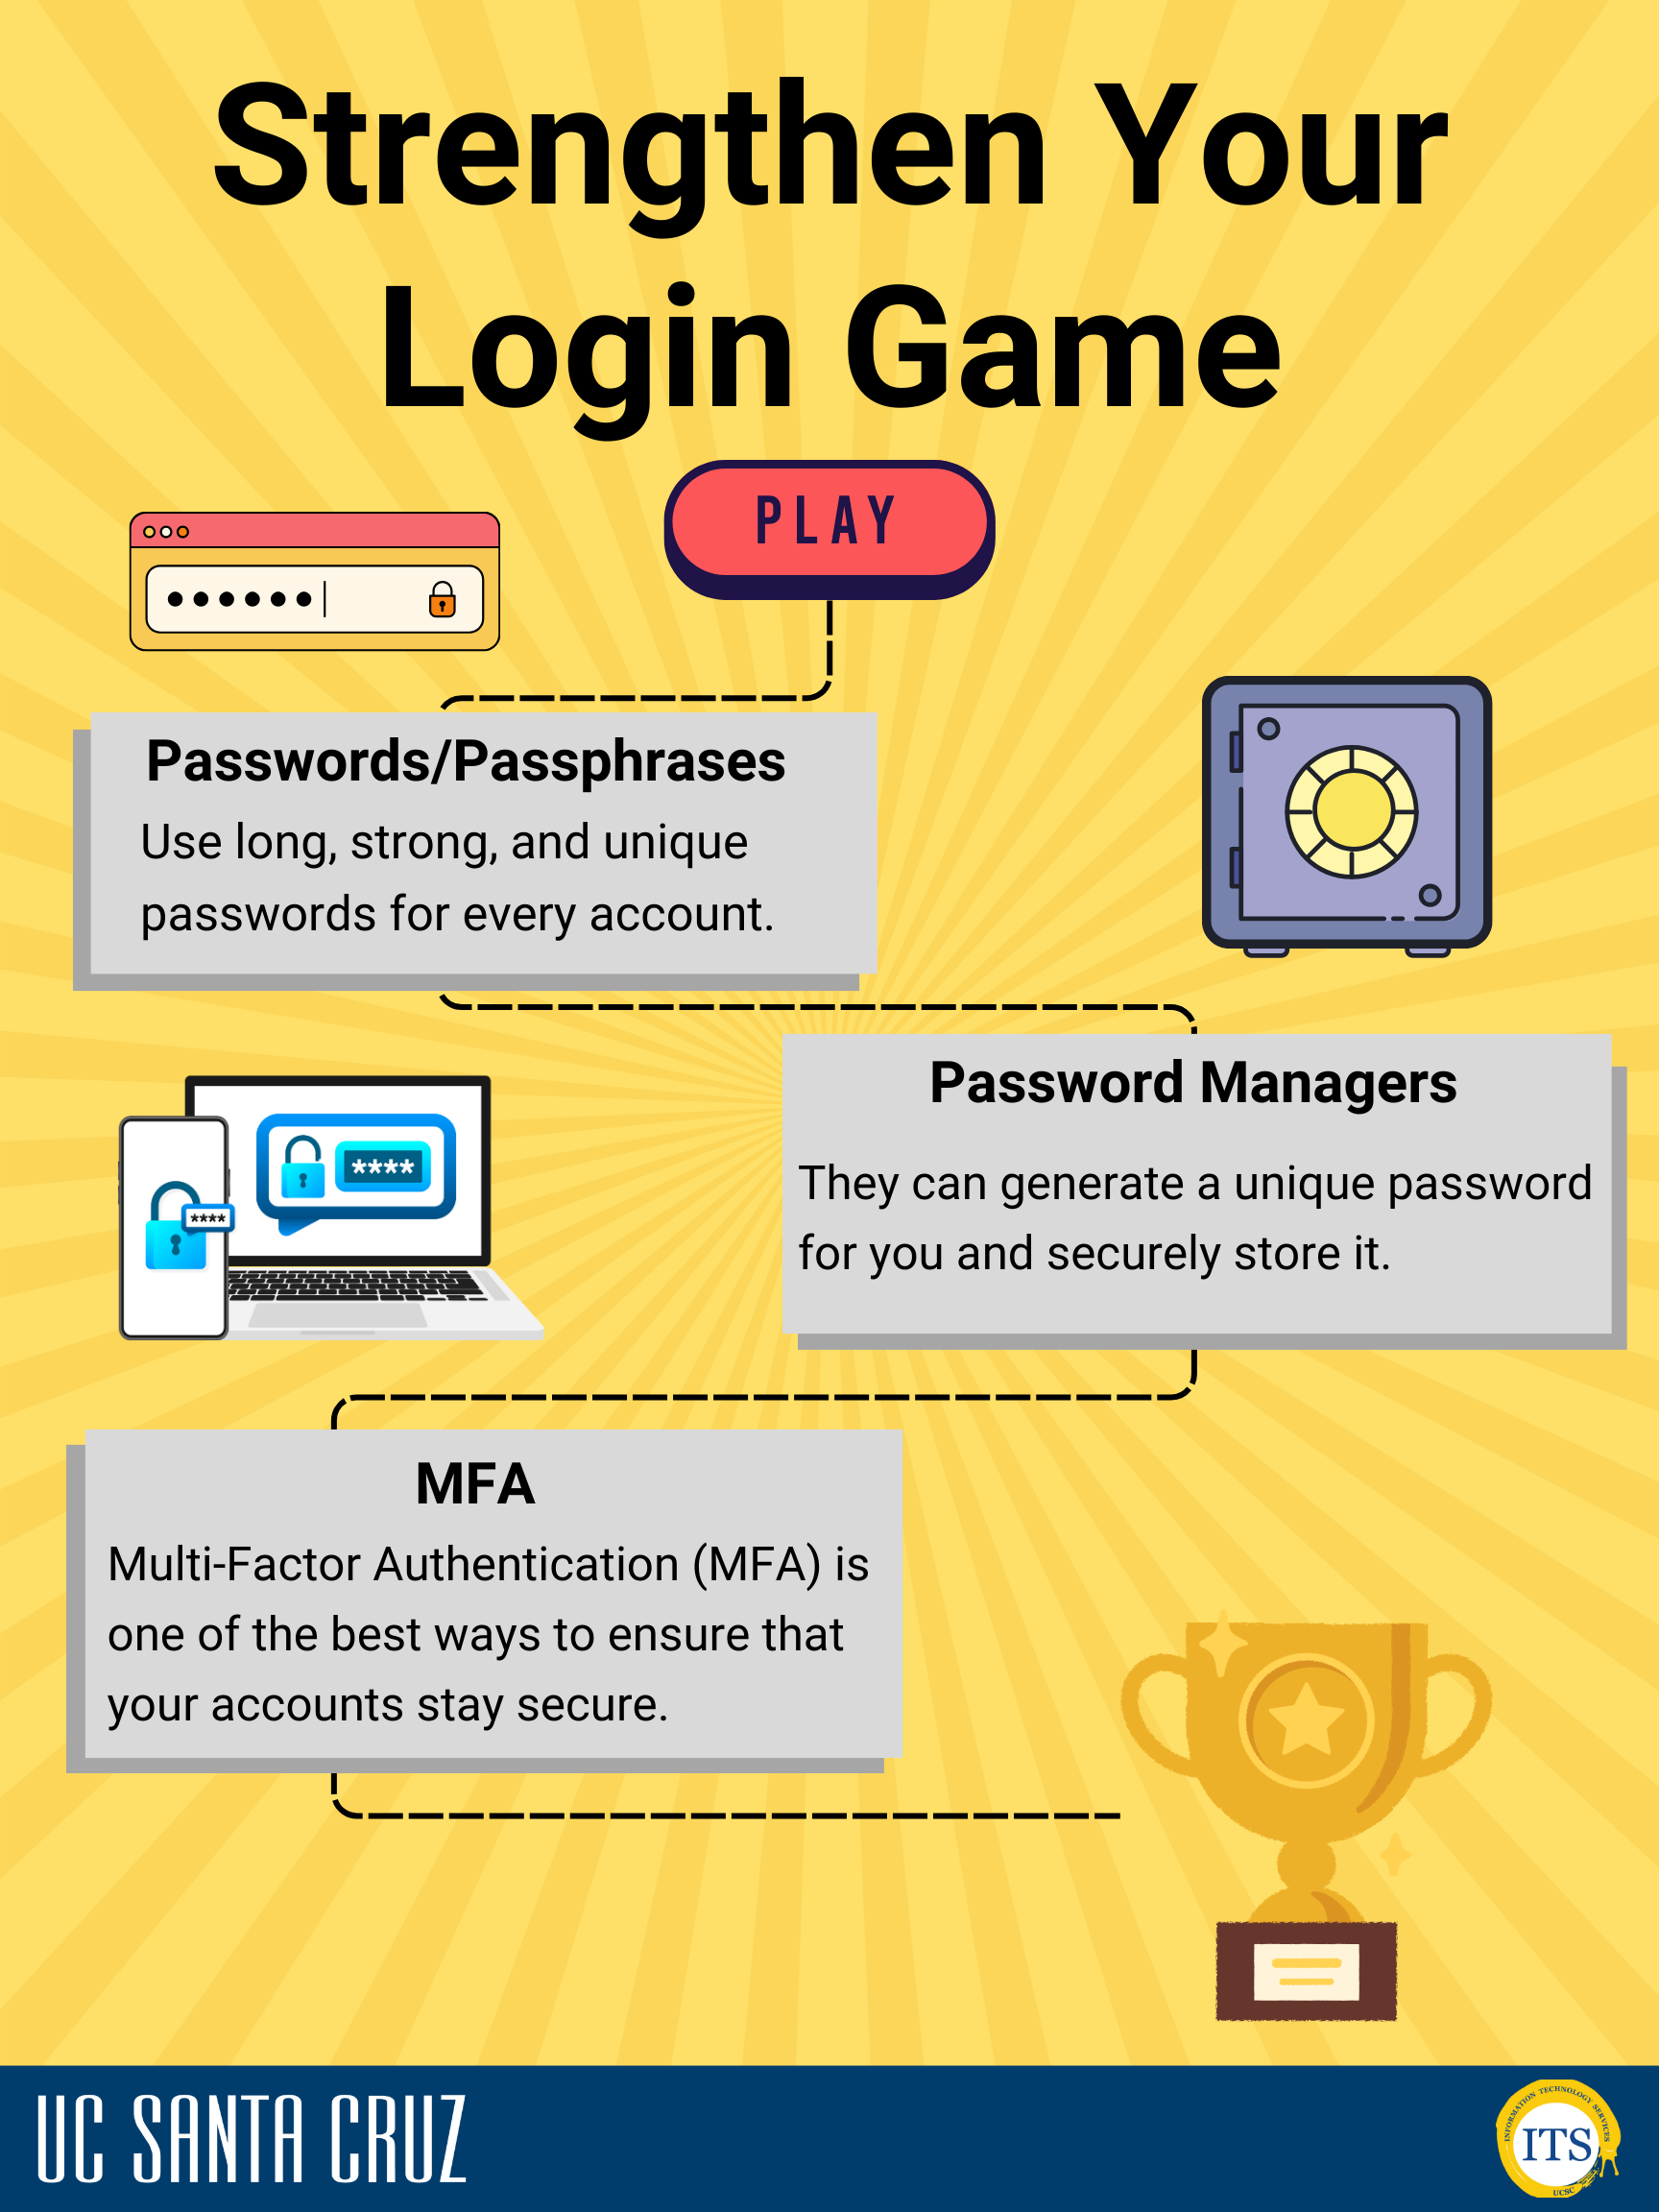 Strengthen Your Login Game with Passwords/Passphrases, Password Managers, and Multi-factor Authentication